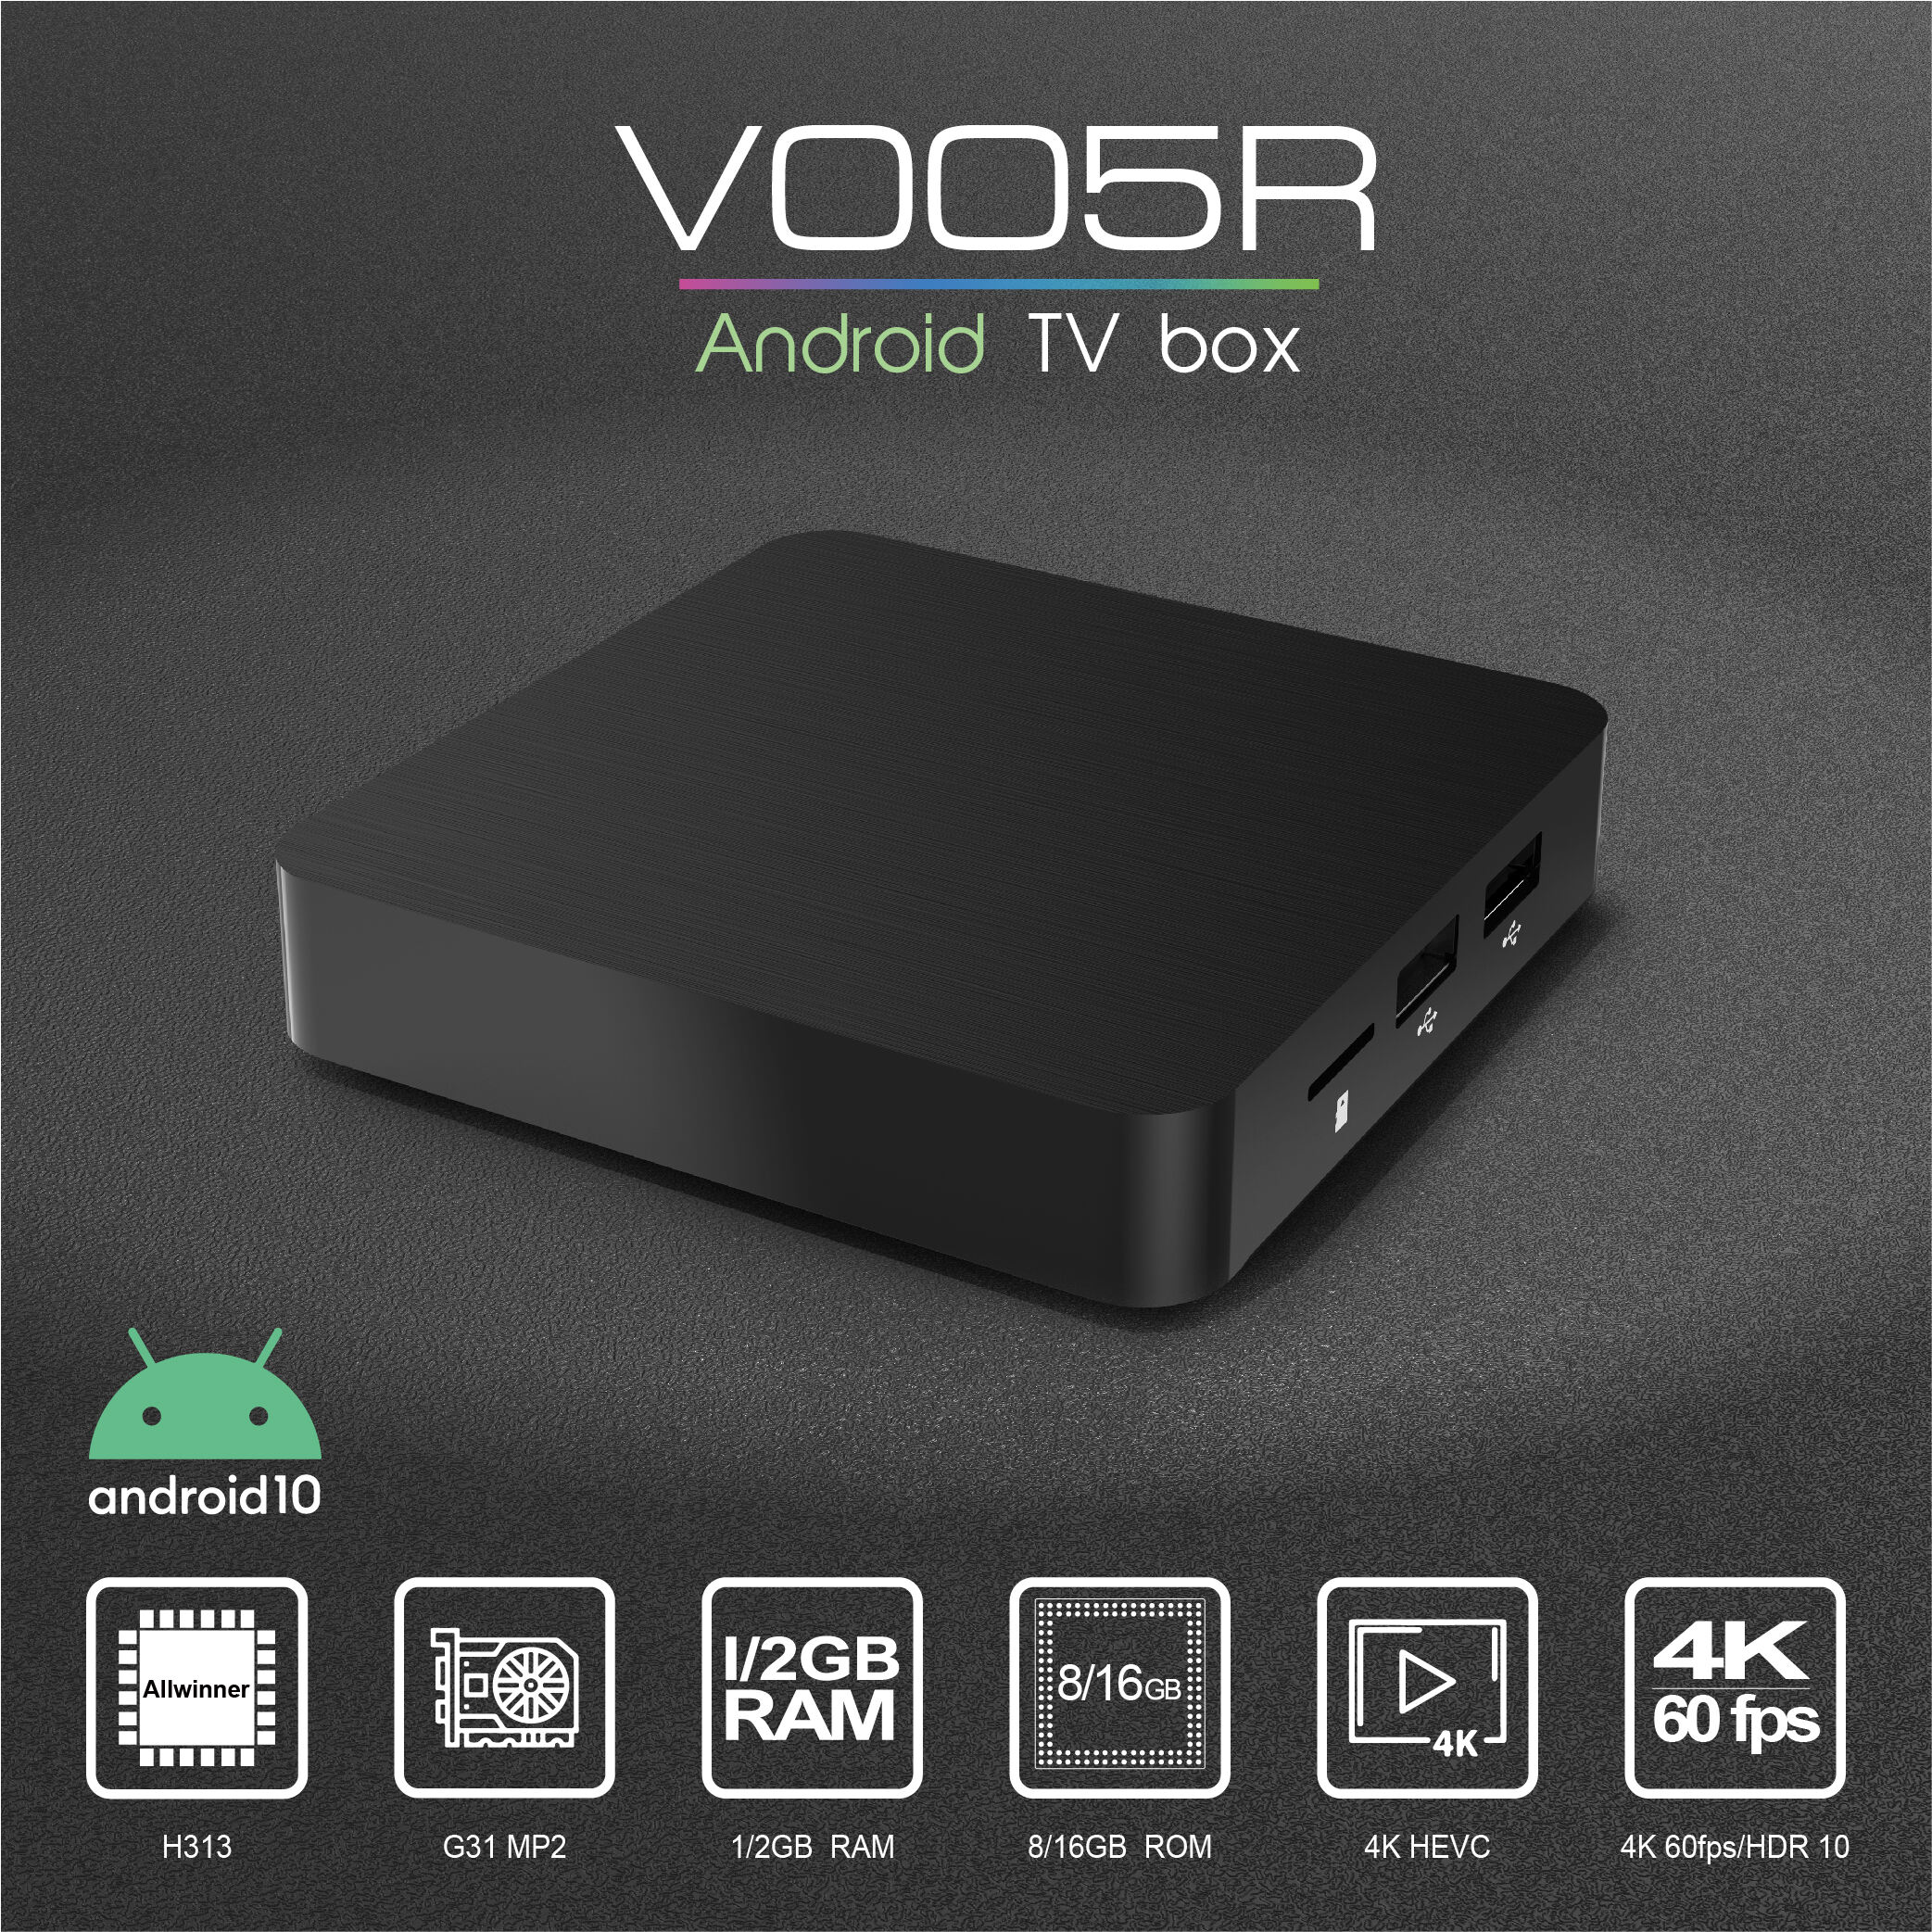 Android 10.0 OS V005R H313 dual band 2.4/5G wifi Android TV Box support YouTube 4K 3640*2160p manufacture